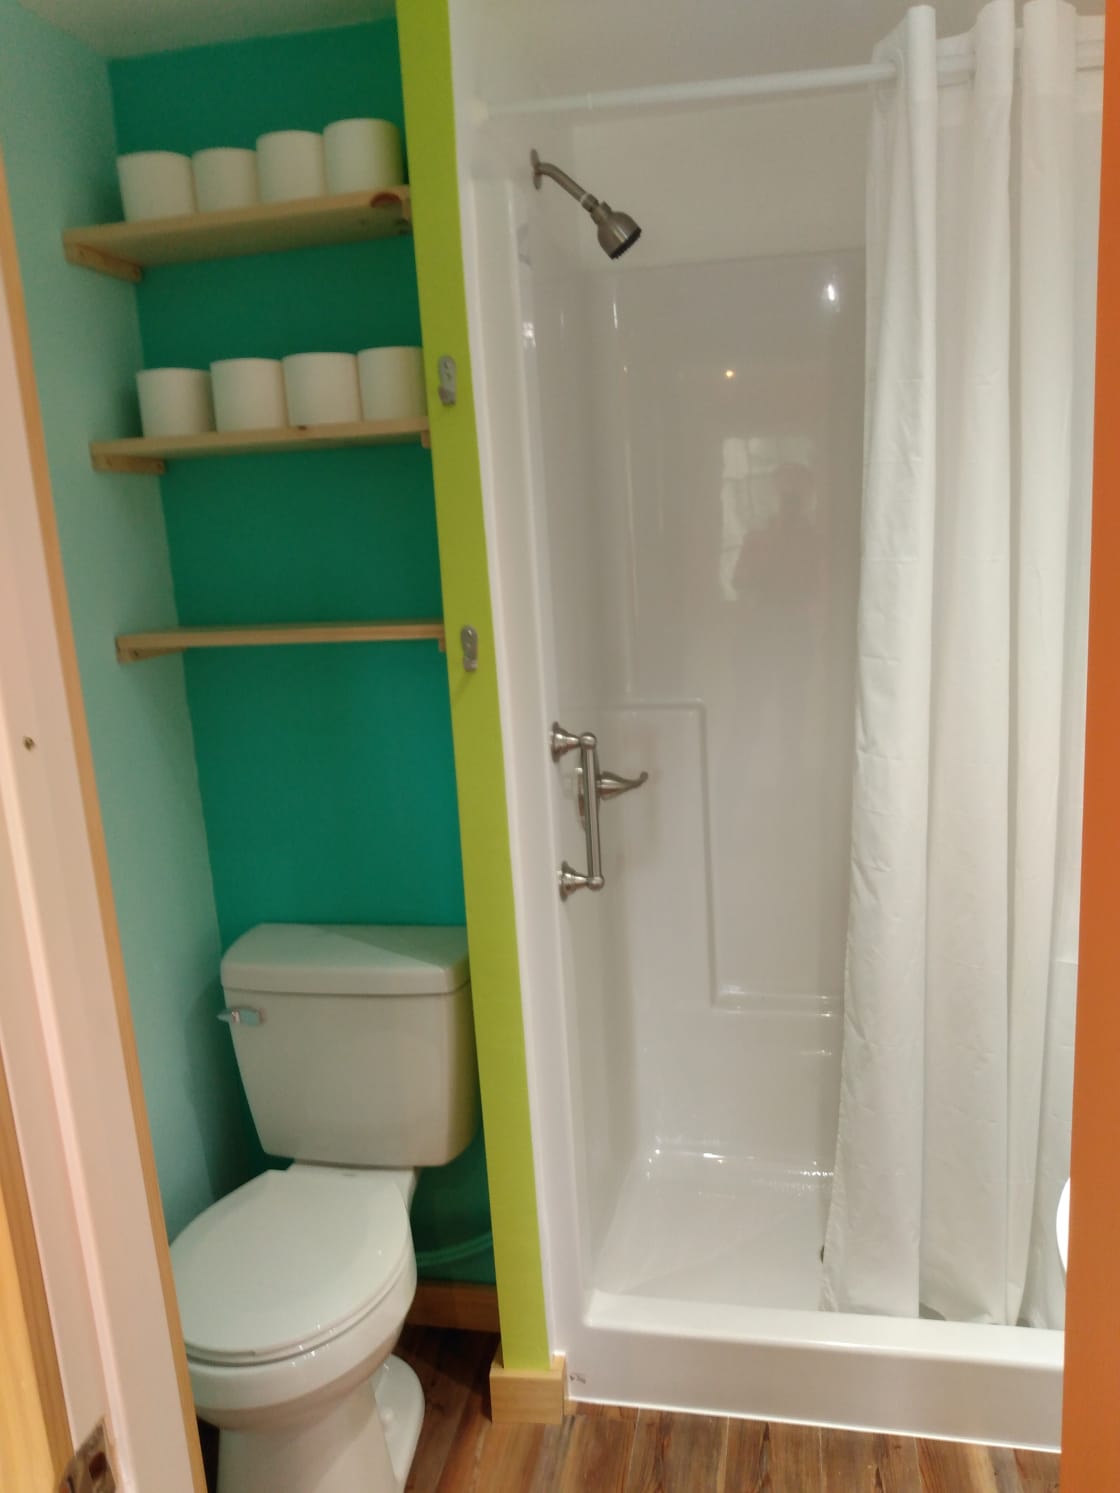 There are two bathrooms, each with a toilet and sink, and one of them has a hot water shower (shown here).